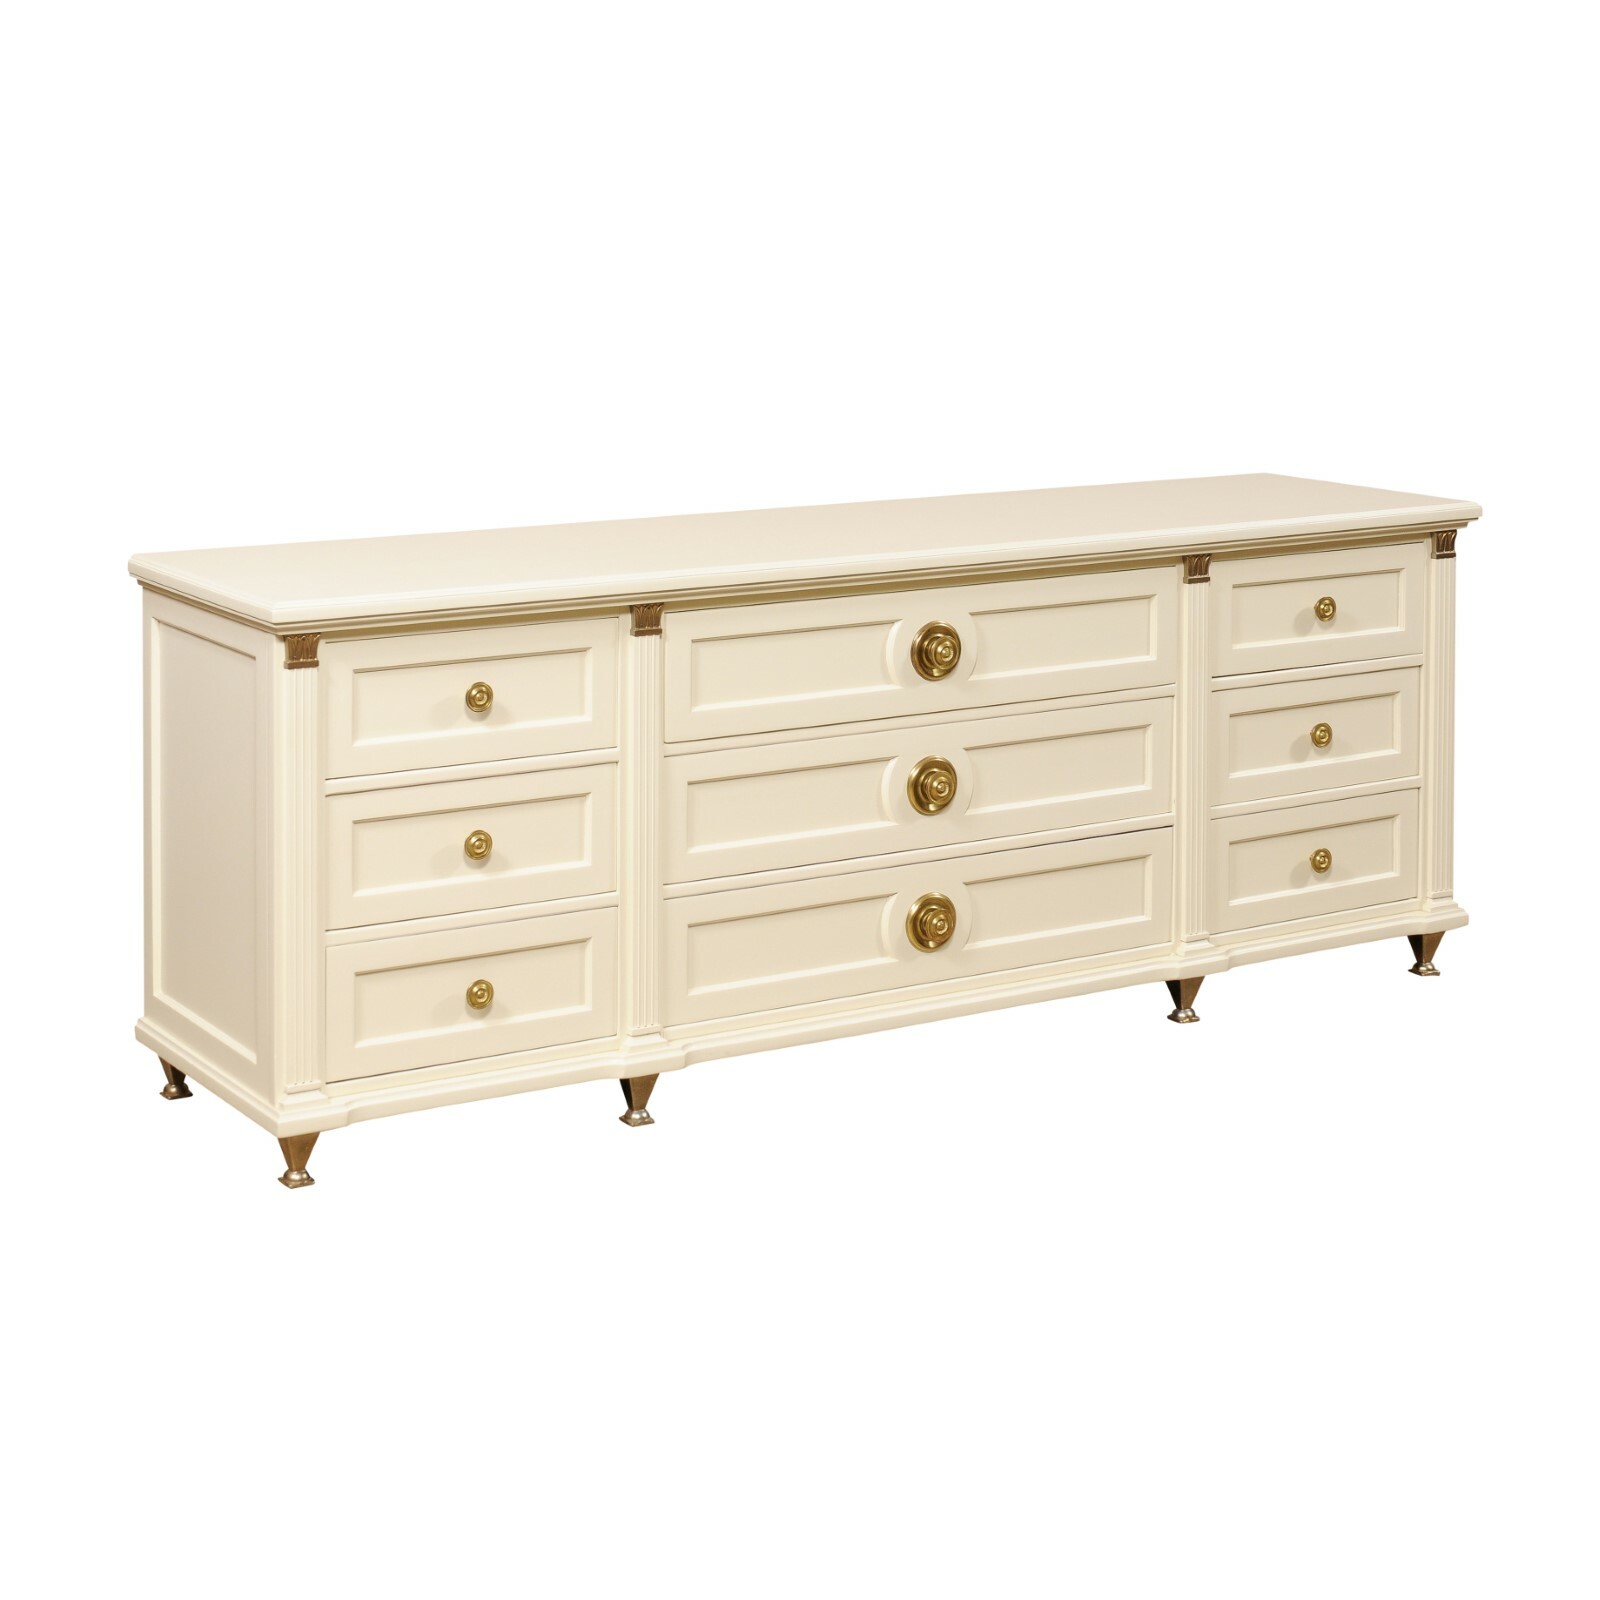 Vintage 7 Ft Chest of Drawers, Ivory & Gold